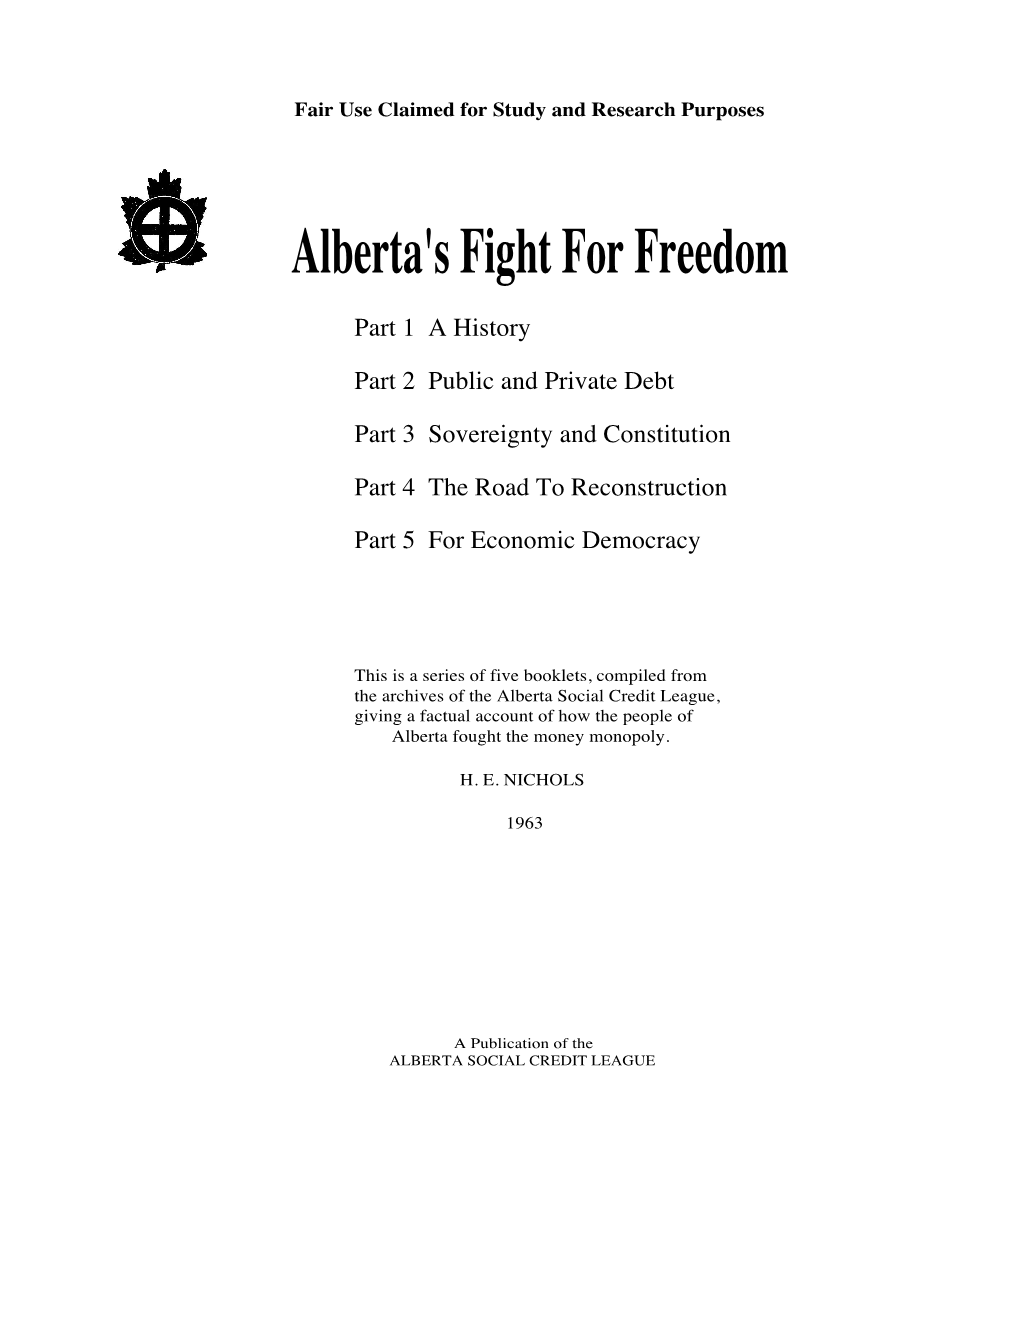 Alberta's Fight for Freedom